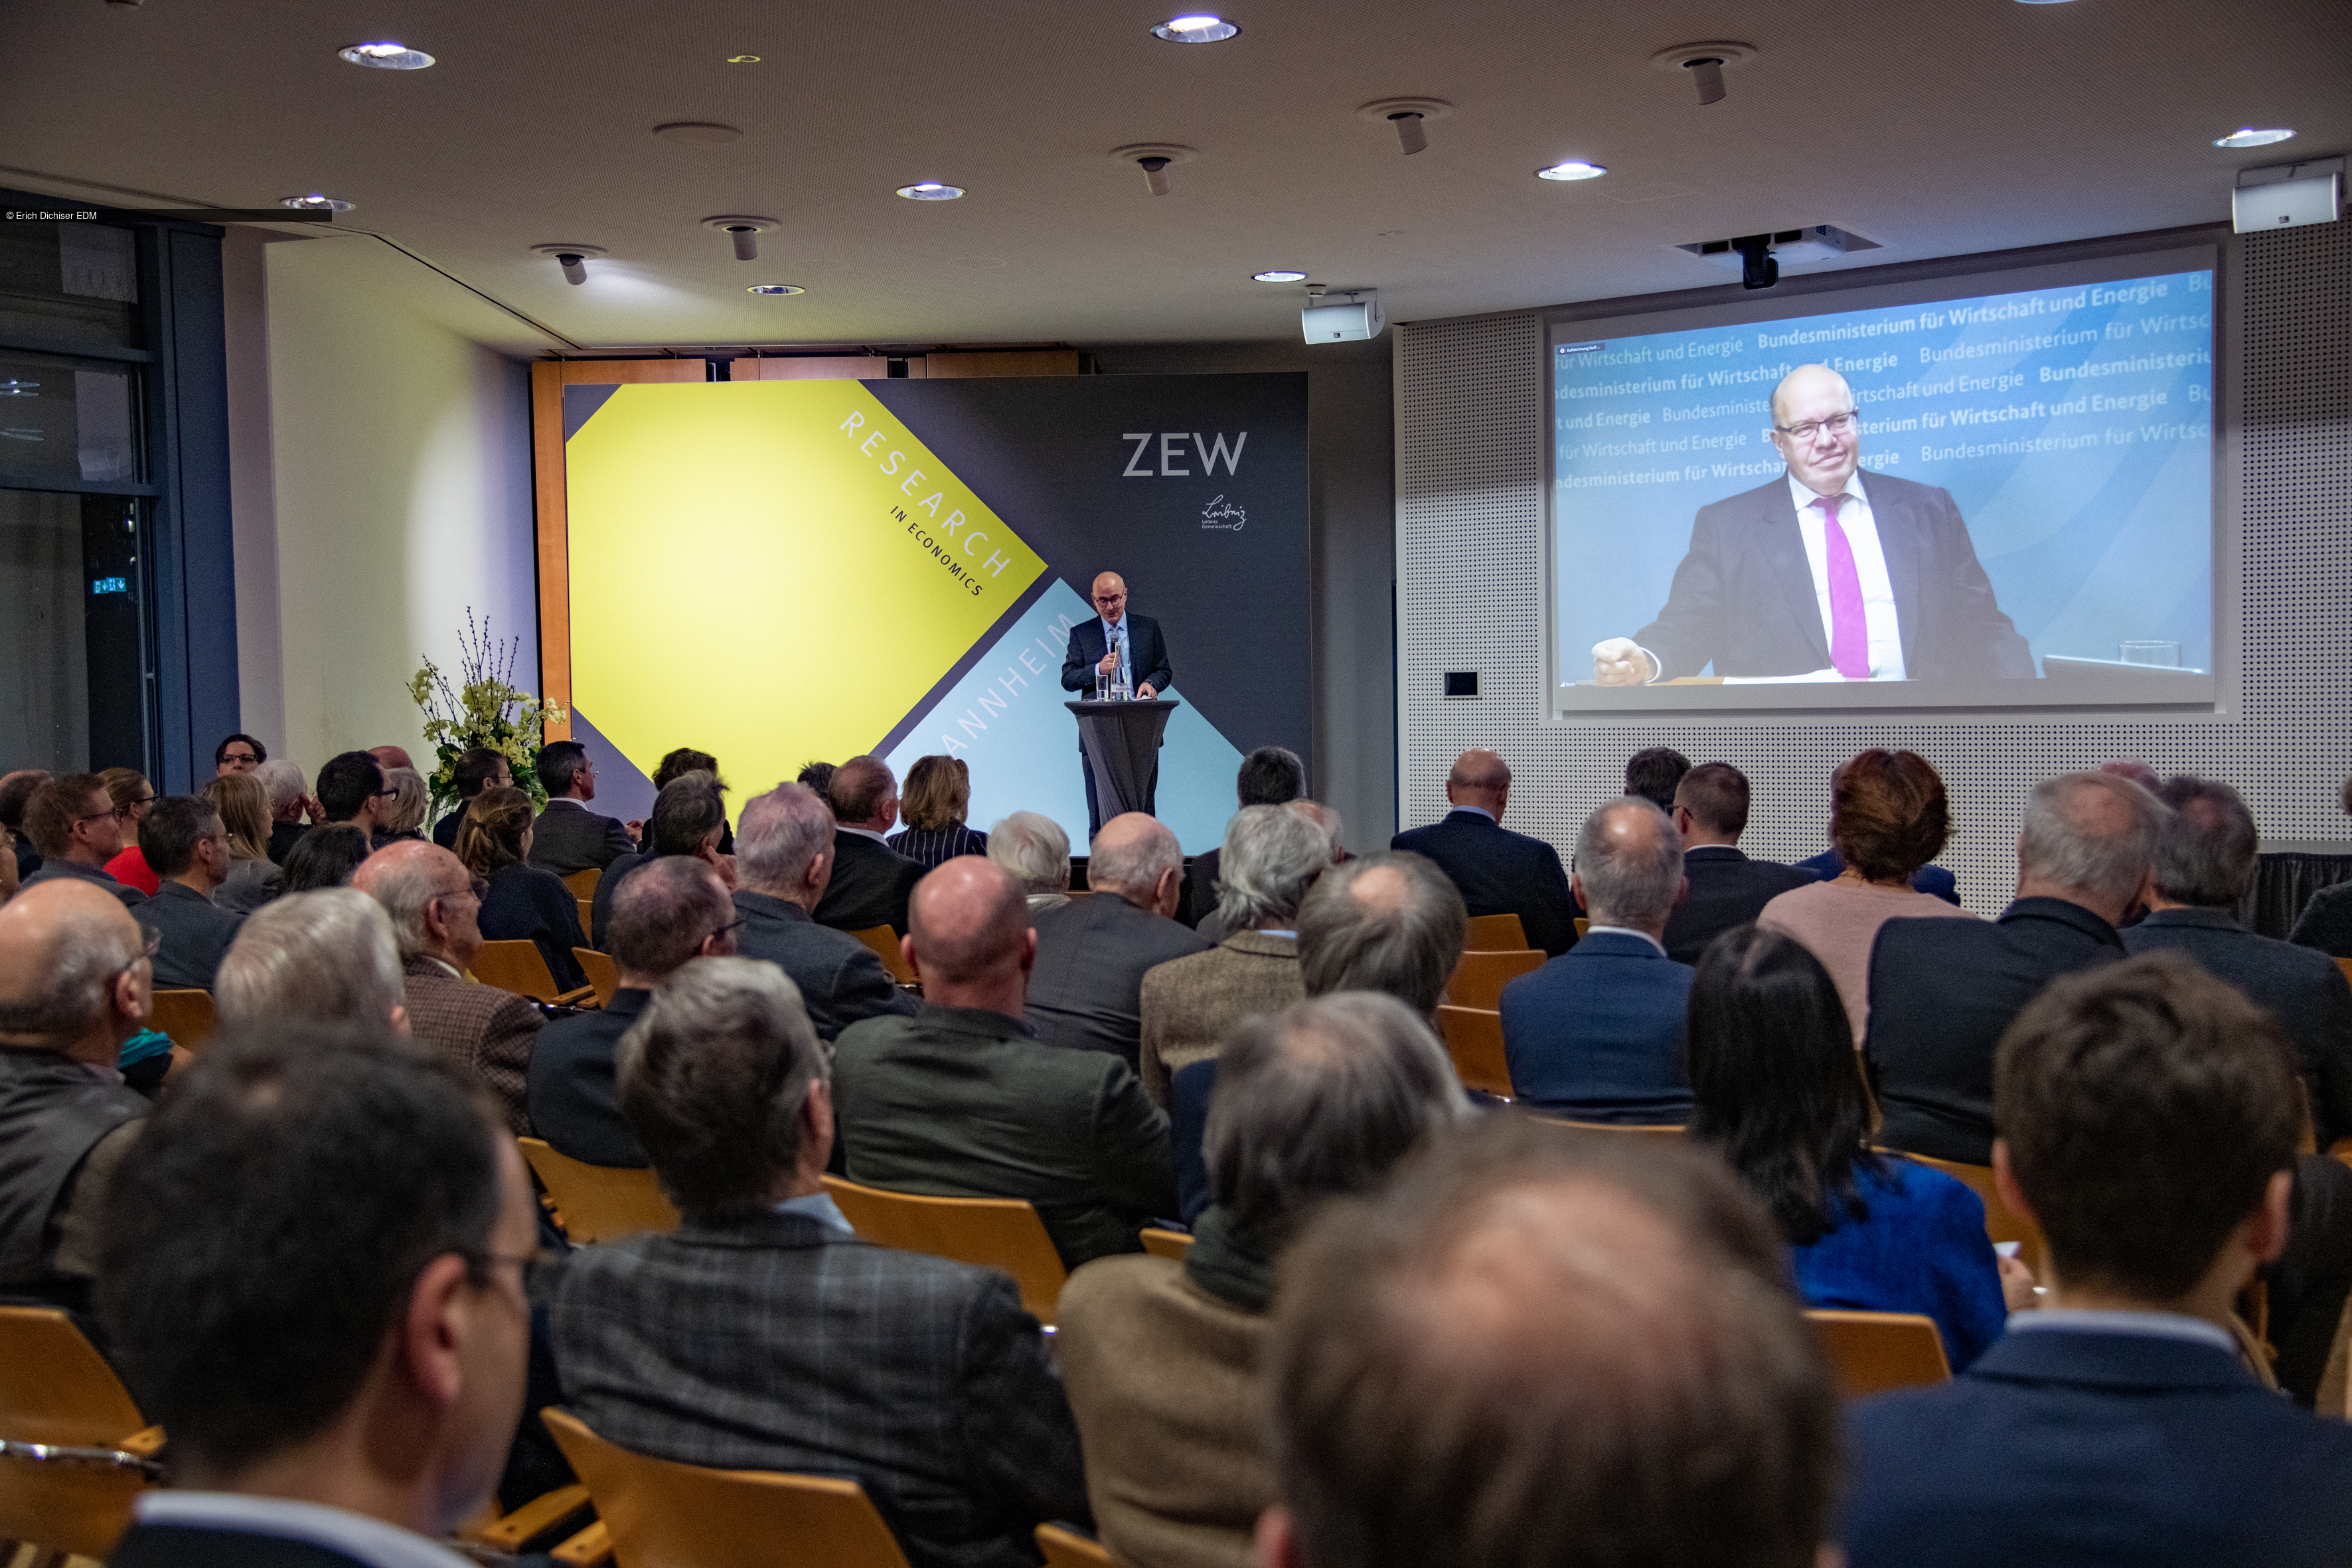 ZEW President Professor Achim Wambach, PhD welcomes the audience and the speaker of the evening, Federal Minister of Economics Peter Altmaier (on screen).